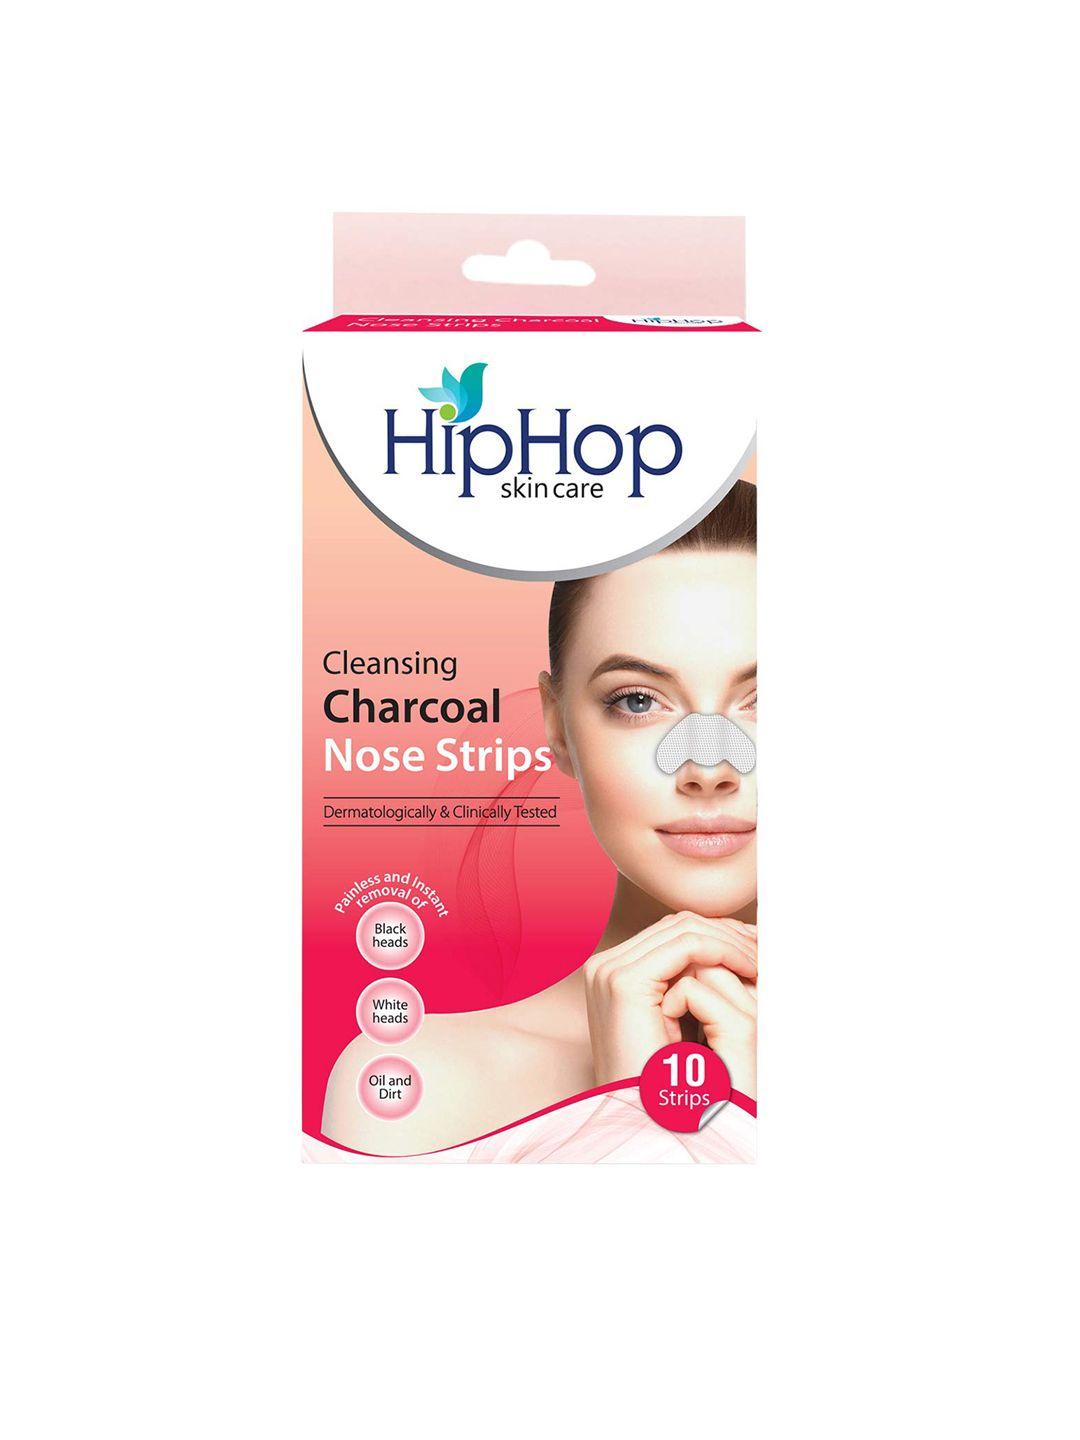 hiphop skincare cleansing charcoal nose strips - 10 strips